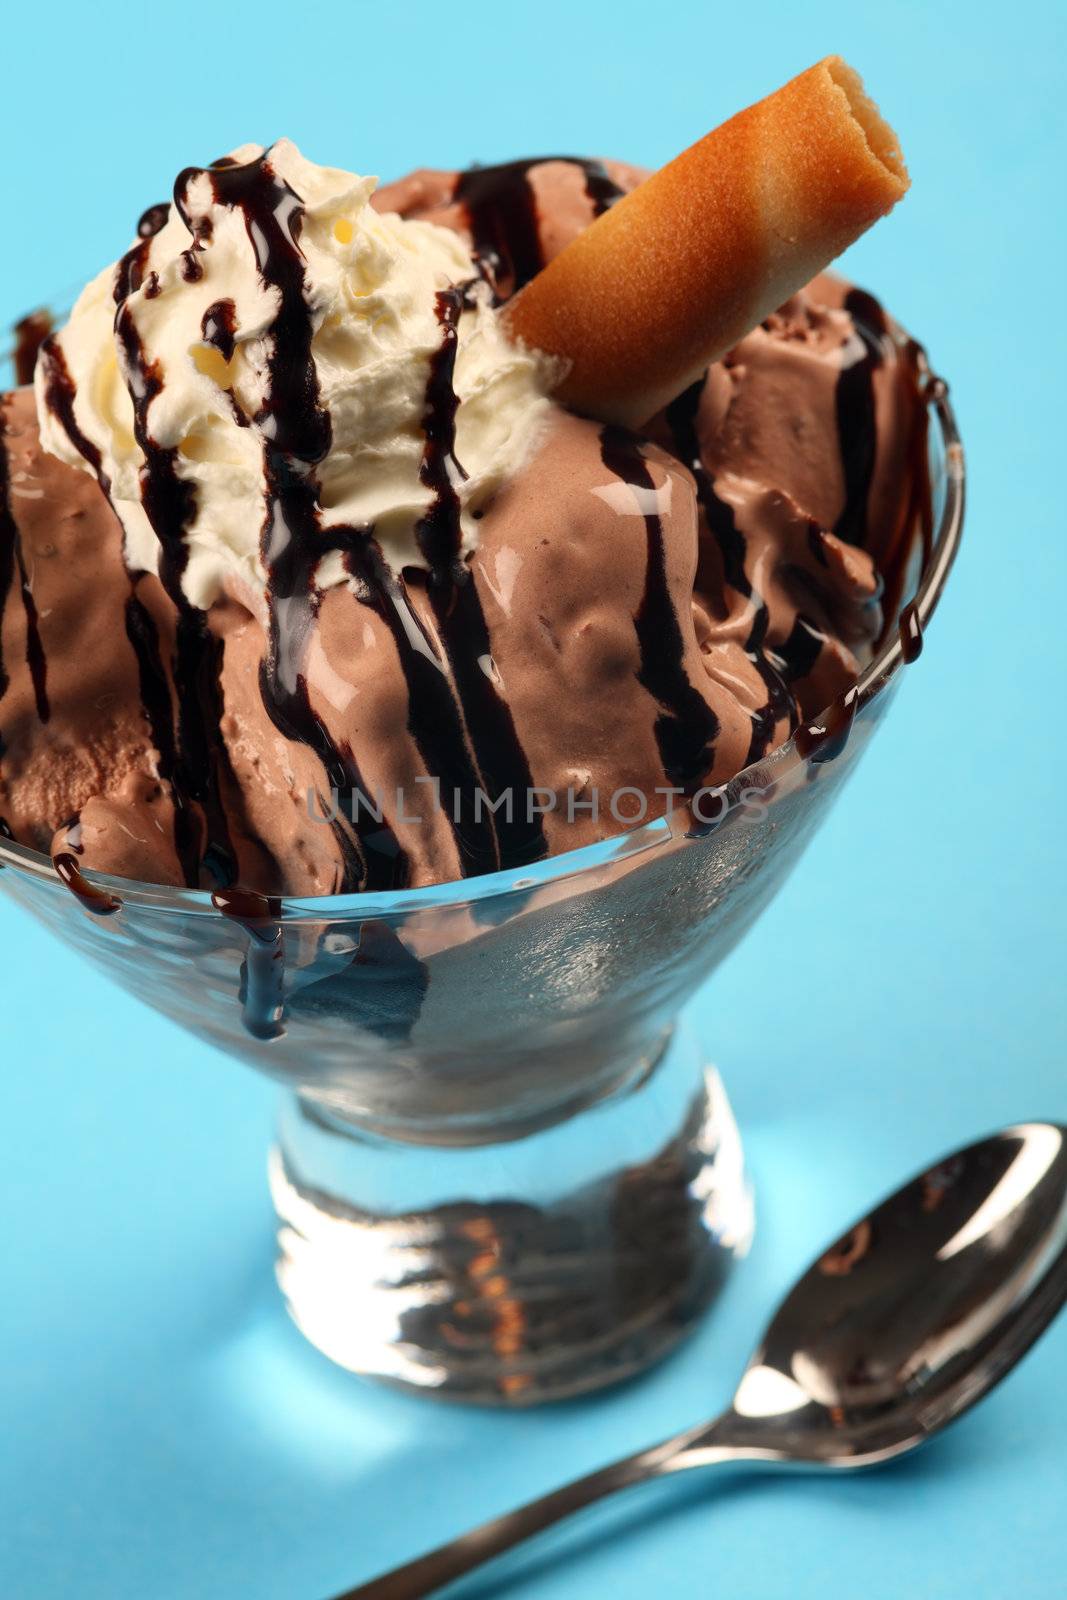 Photo of a bowl of melting chocolate ice cream with whipped cream and chocolate drizzle.